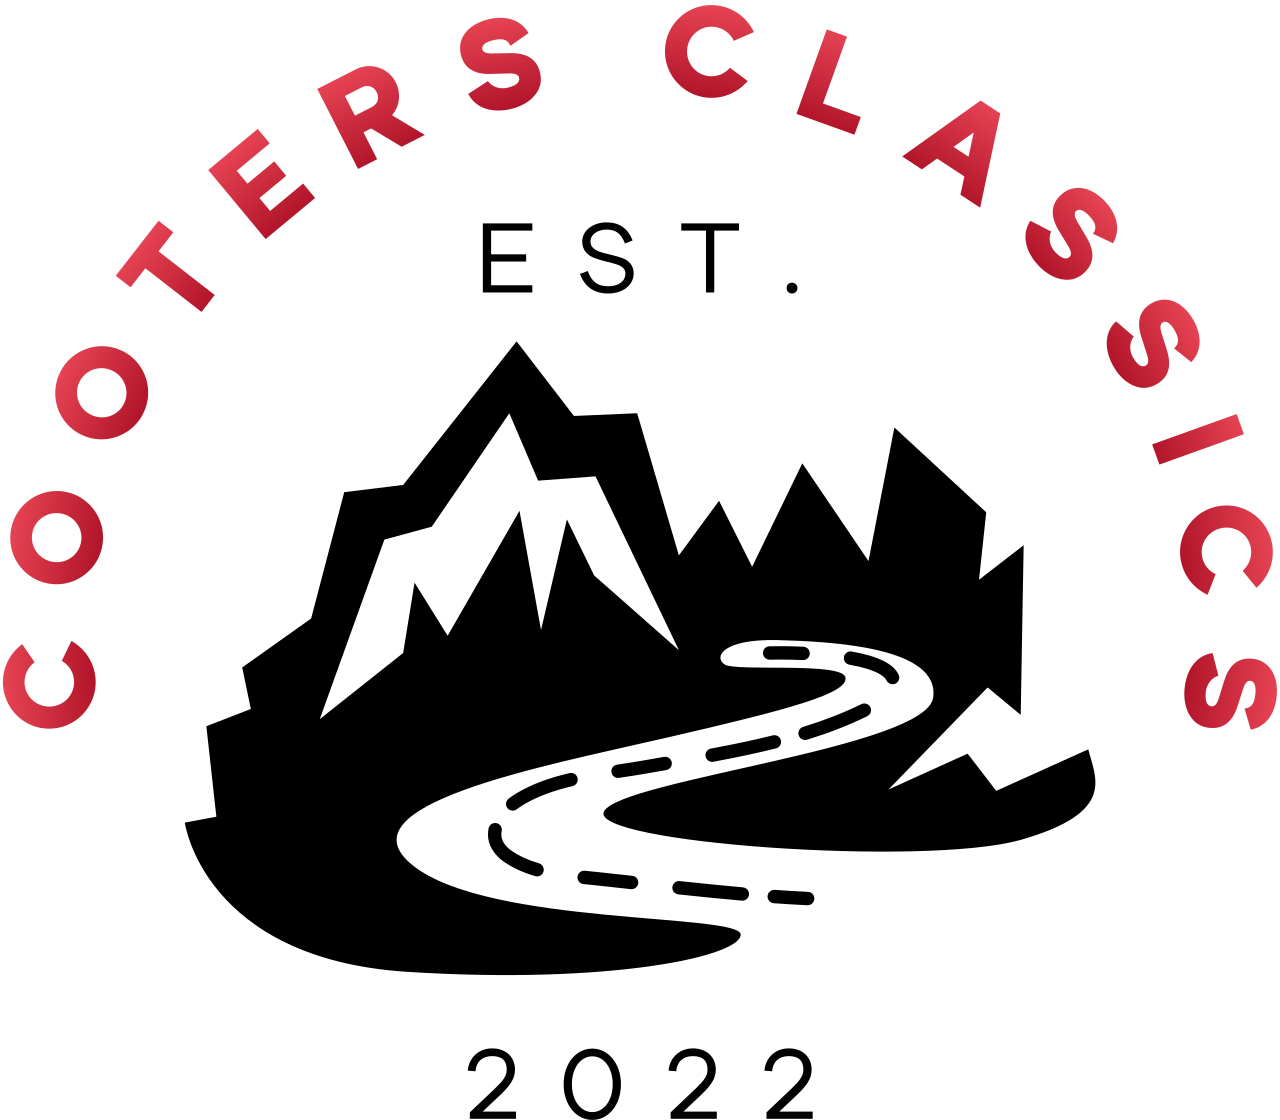 COOTERS CLASSICS's web page